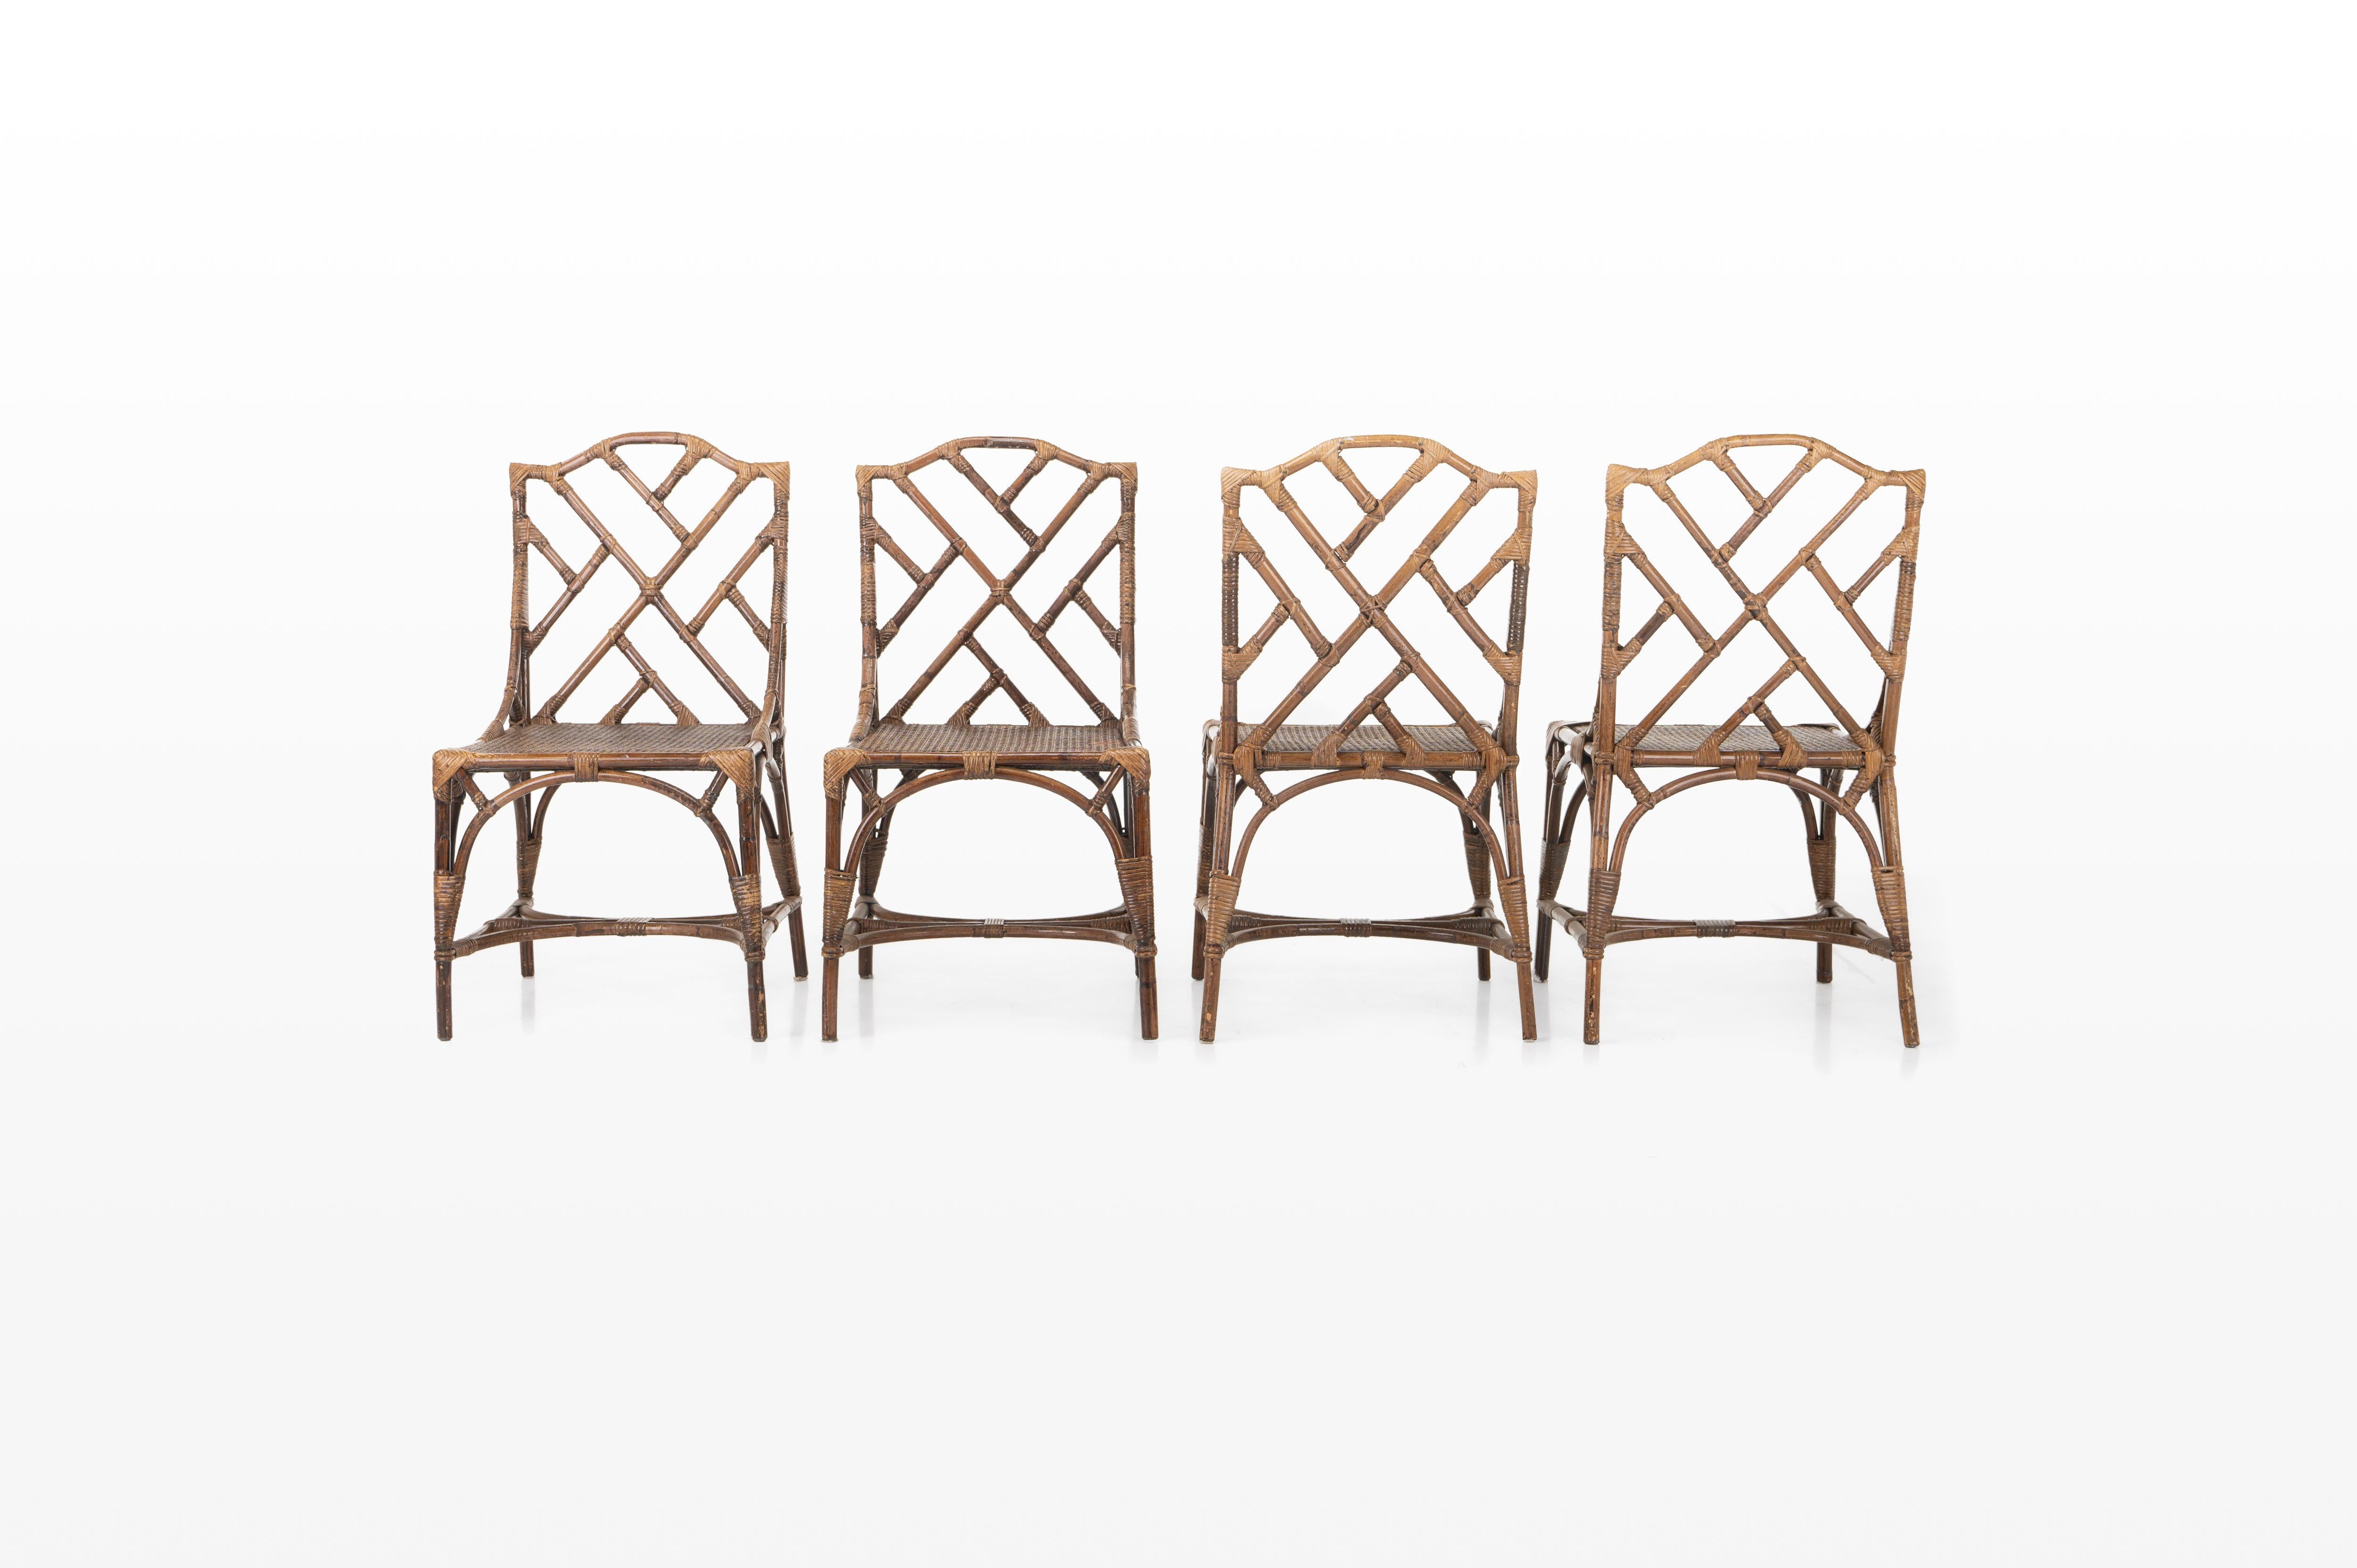 Bohemian Rattan and Bamboo Dining Table and 4 Dining Chairs, 1970s For Sale